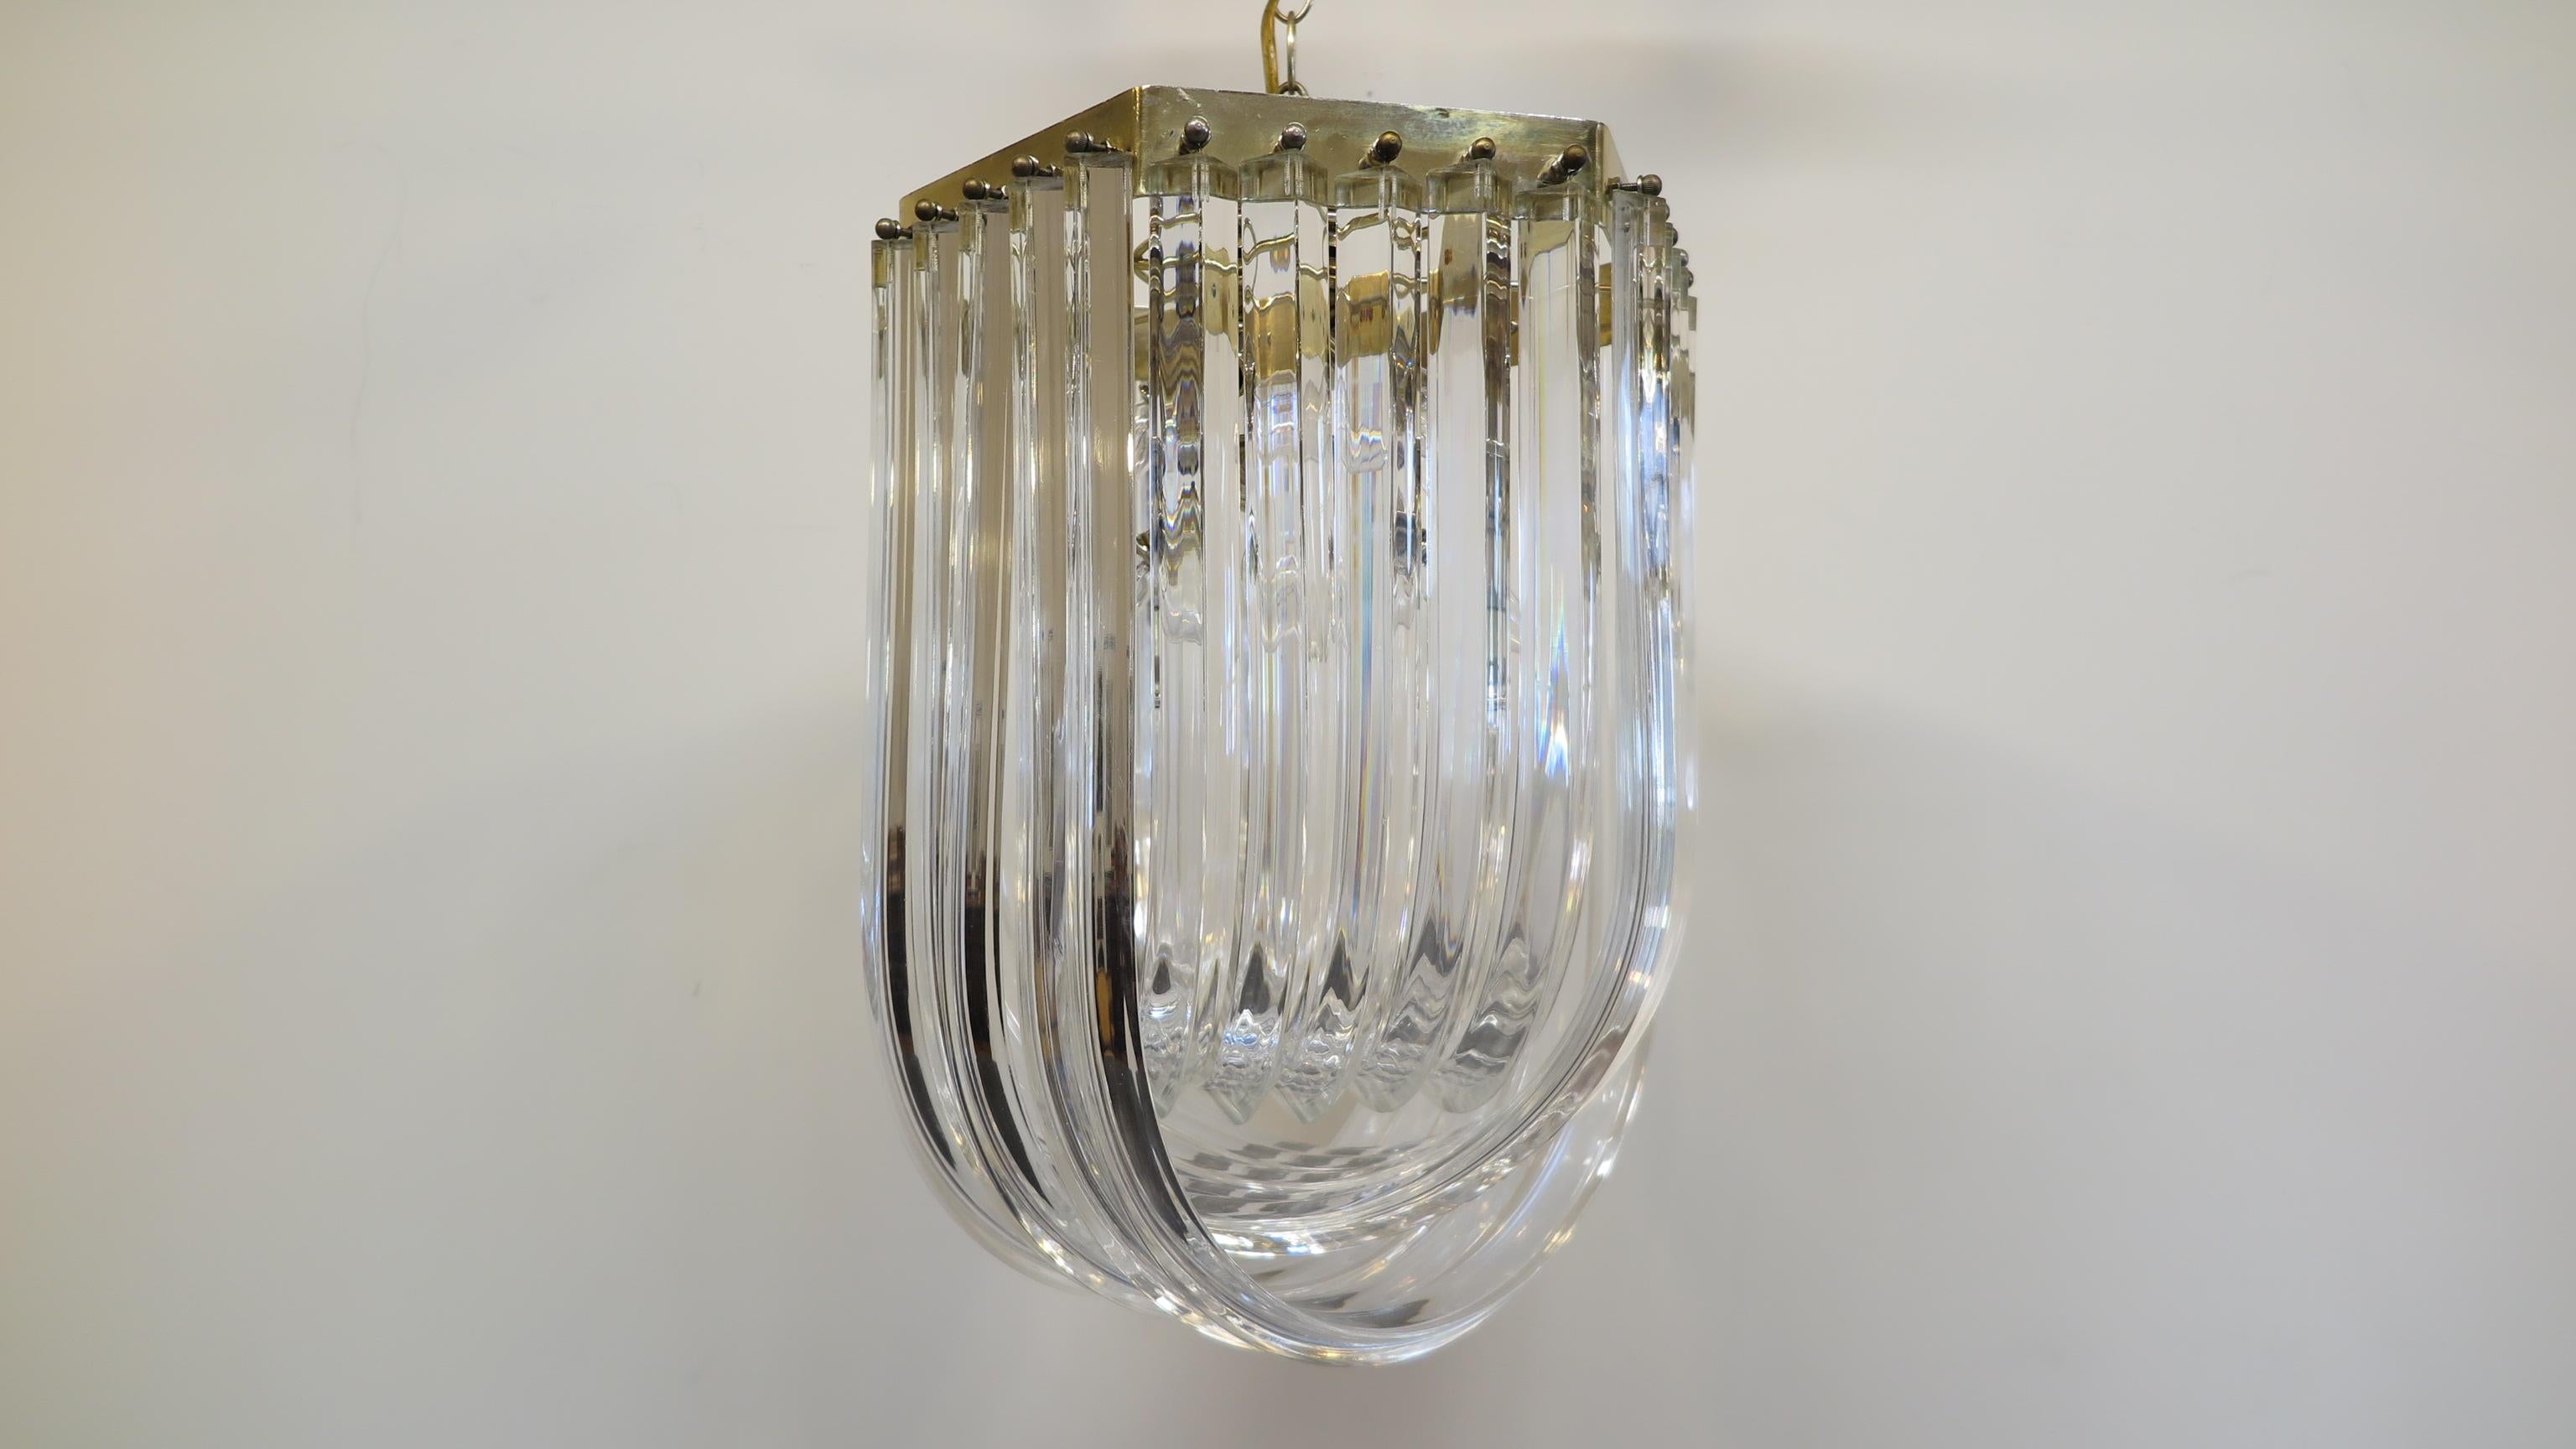 Lucite and brass pendant lamp over lapping ribbon design 1960-1970. Midcentury Lucite and brass pendant. Hollywood Regency style. Nine-light sockets provide illuminating brilliance when reflected through the arched Lucite bands. Can be mounted flush